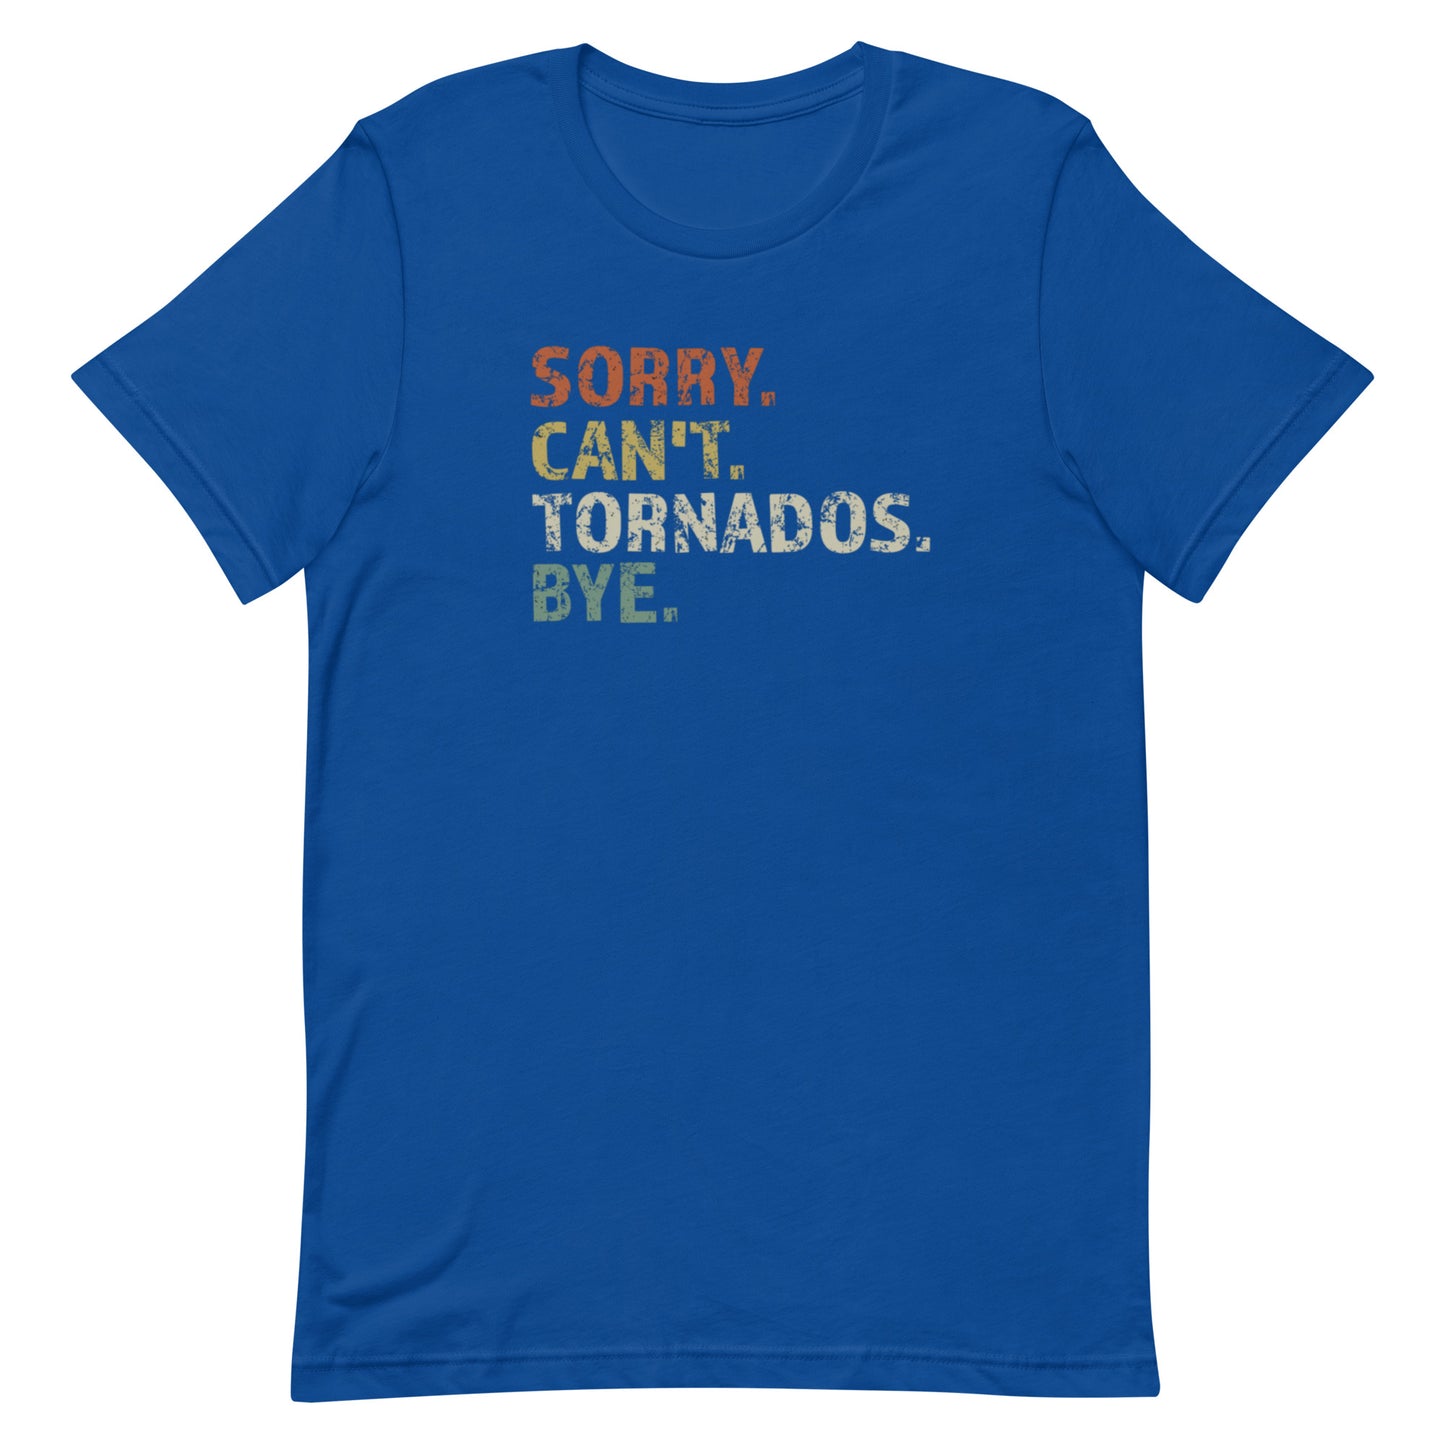 Sorry. Can't. Tornados. Bye.